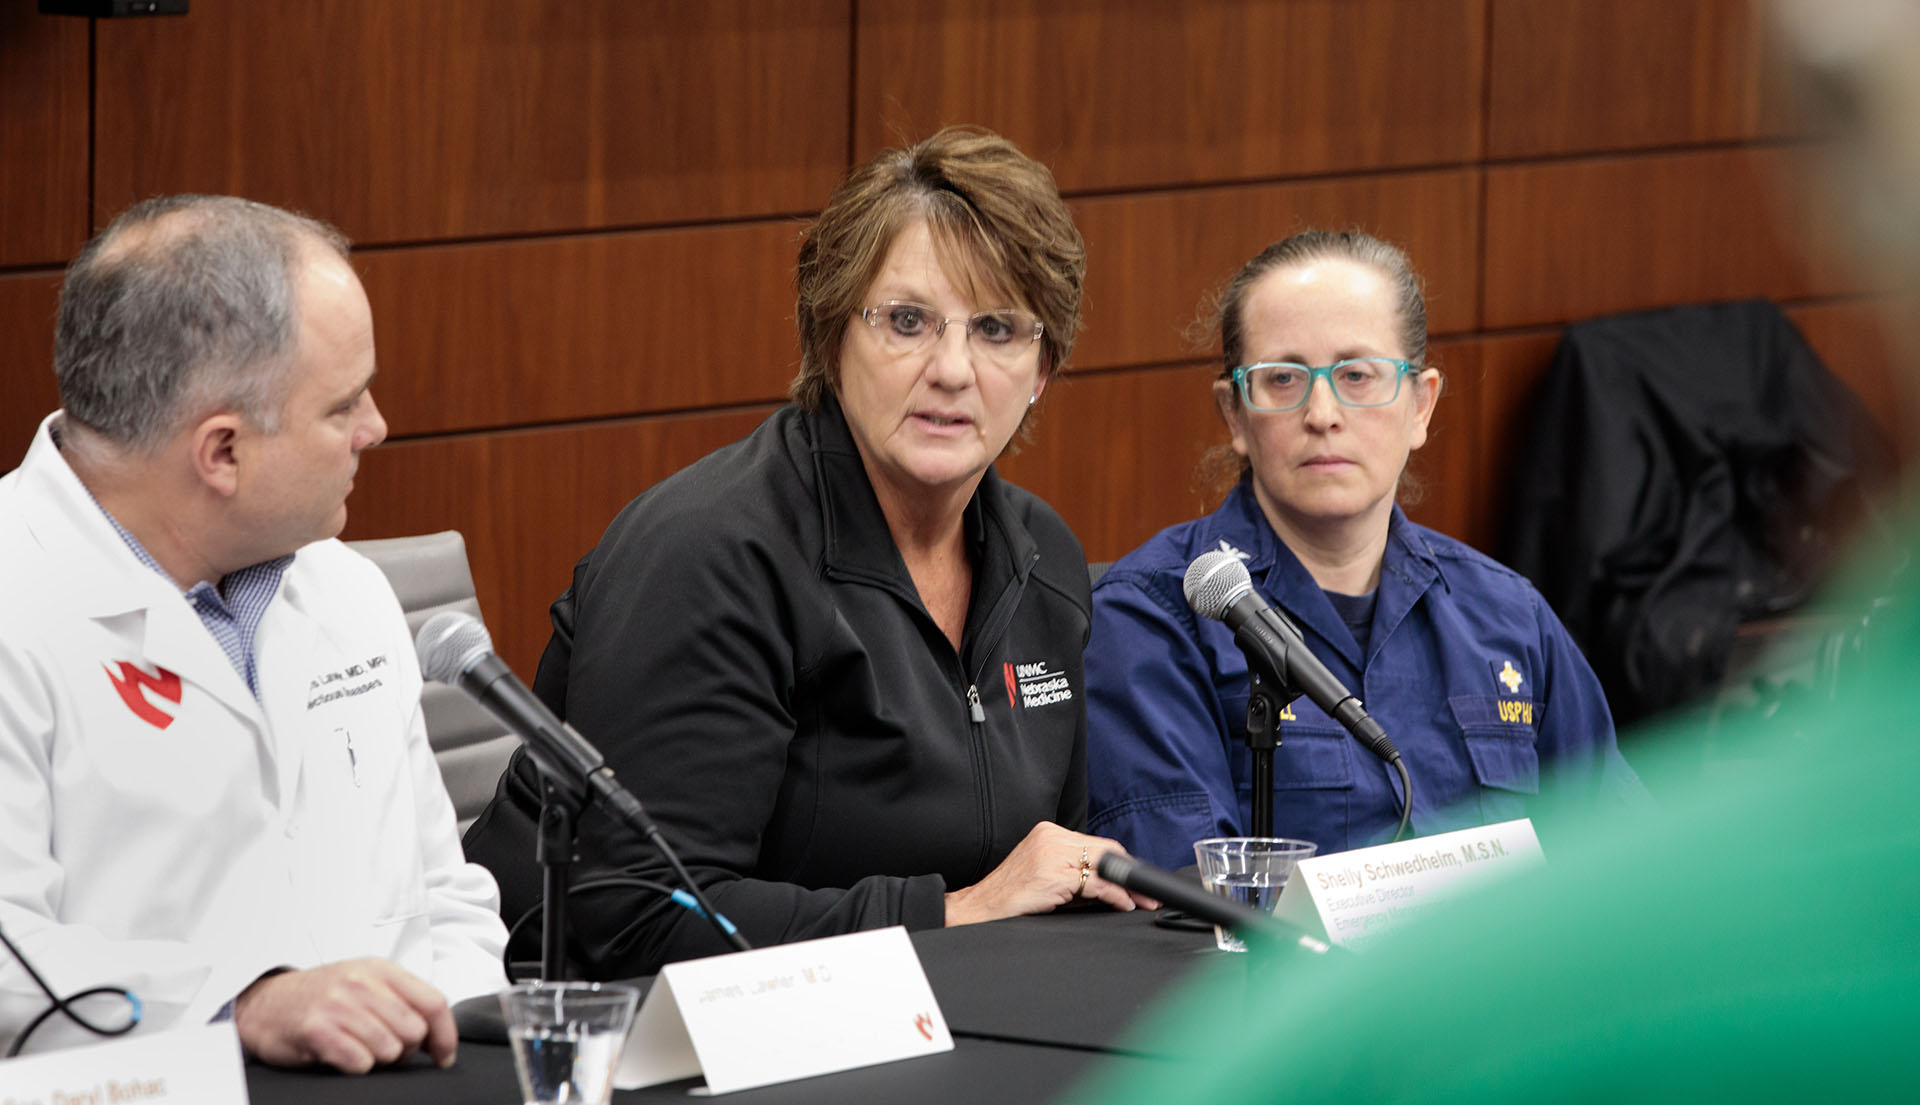 Shelly Schwedhelm, executive director of emergency management and clinical operations at the Global Center for Health Security, addresses a press conference in February 2020 about the emerging coronavirus pandemic. At left is James Lawler, MD, executive director of international programs and innovation for the GCHS. (Kent Sievers/UNMC)